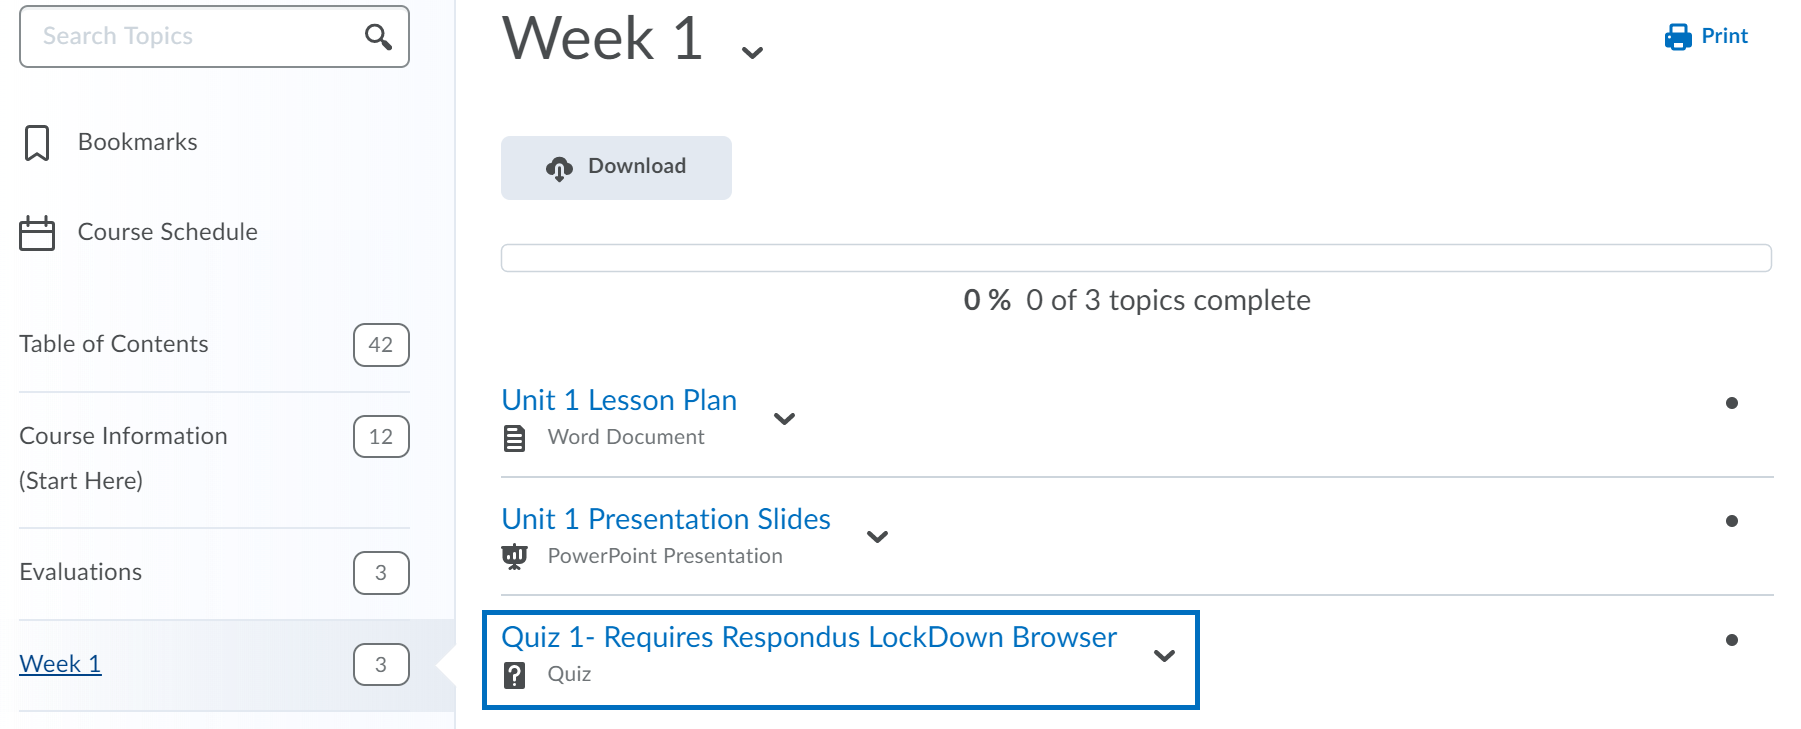 A quiz that requires Respondus LockDown Browser will have the text 'Requires Respondus LockDown Browser' appended to the end of the quiz title.